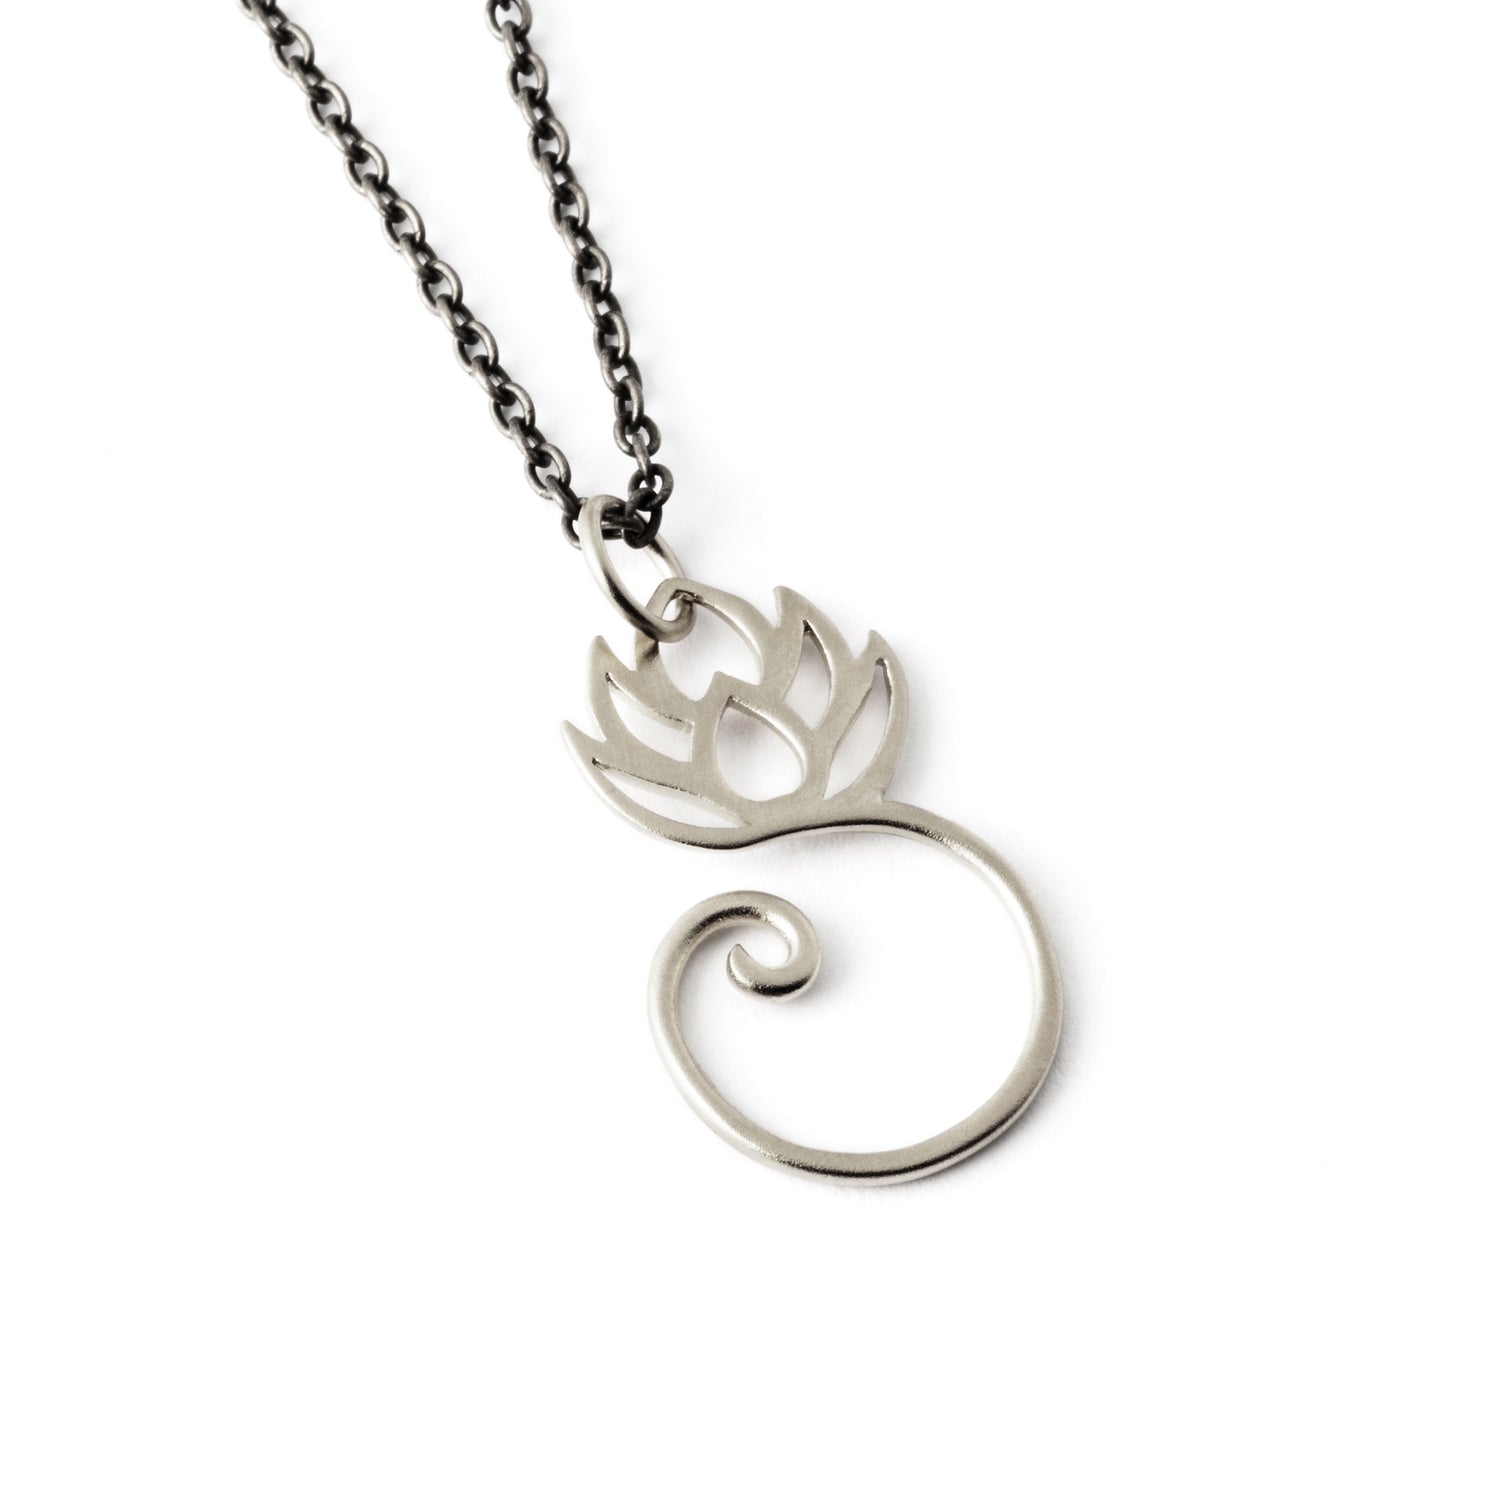 Spiralling Silver Lotus Charm necklace left side view